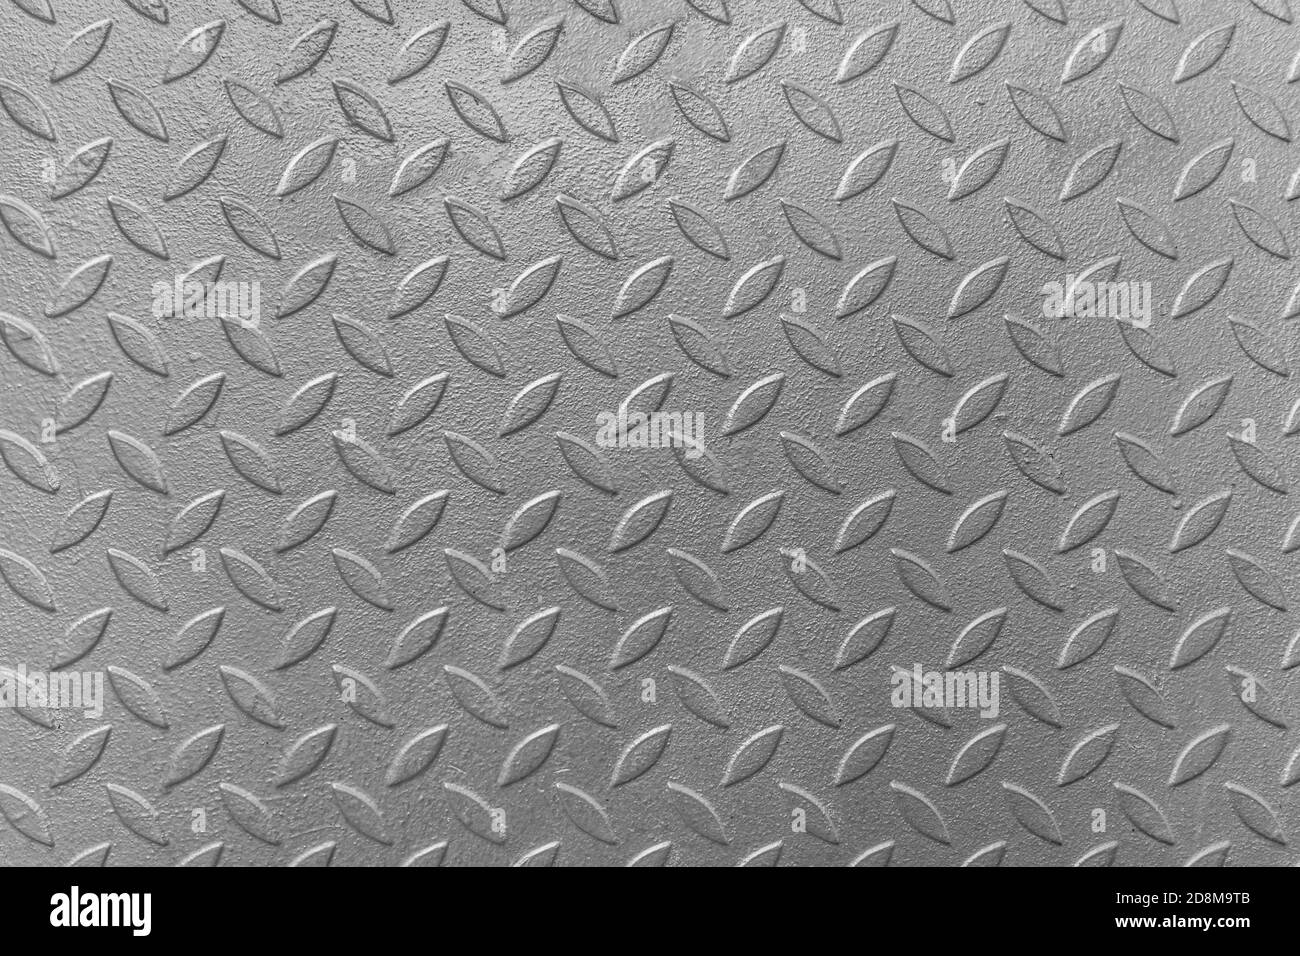 Corrugated metal sheet grey scrap iron steel production gray stainless texture background Stock Photo